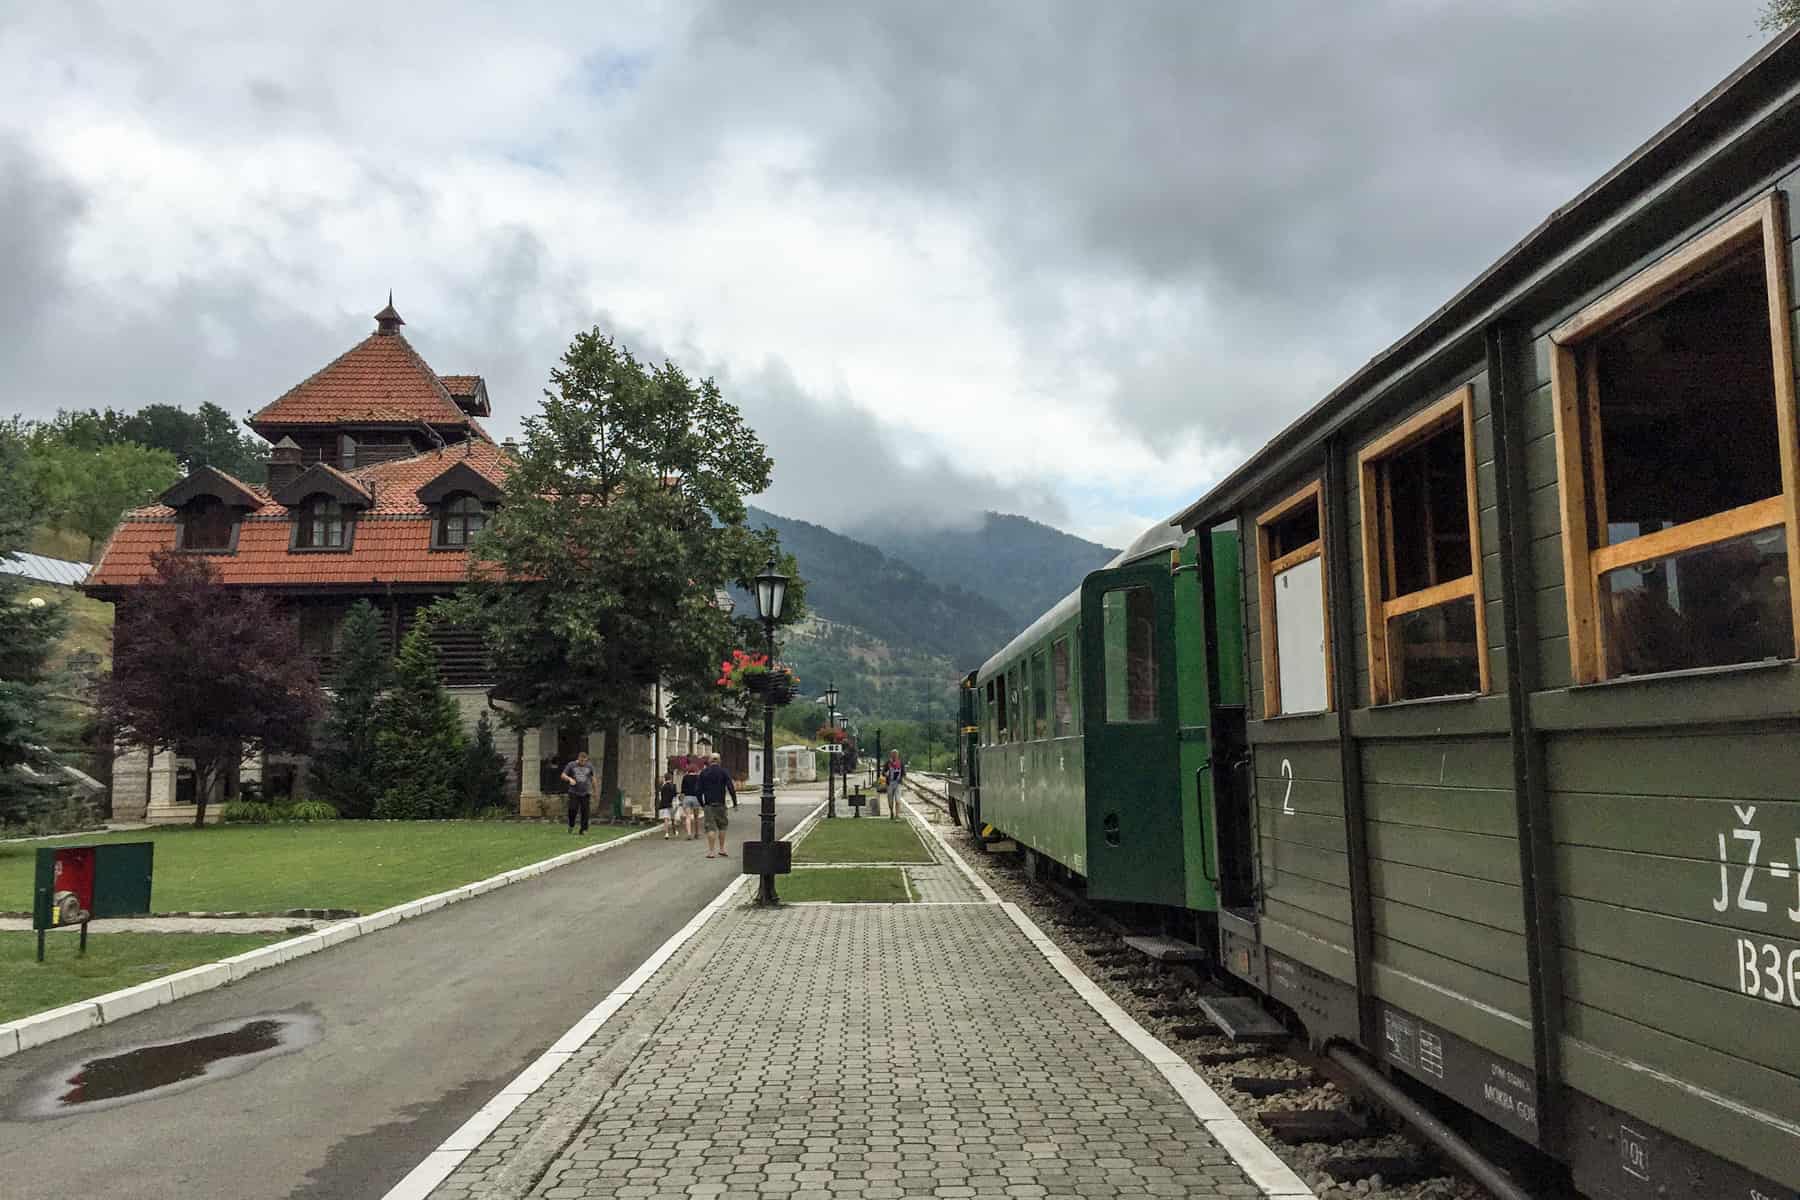 A dark green wood panelled train - The Sargan Eight Railway in Serbia - at the station platform with orange roofed buildings, in the direction of the mountains.